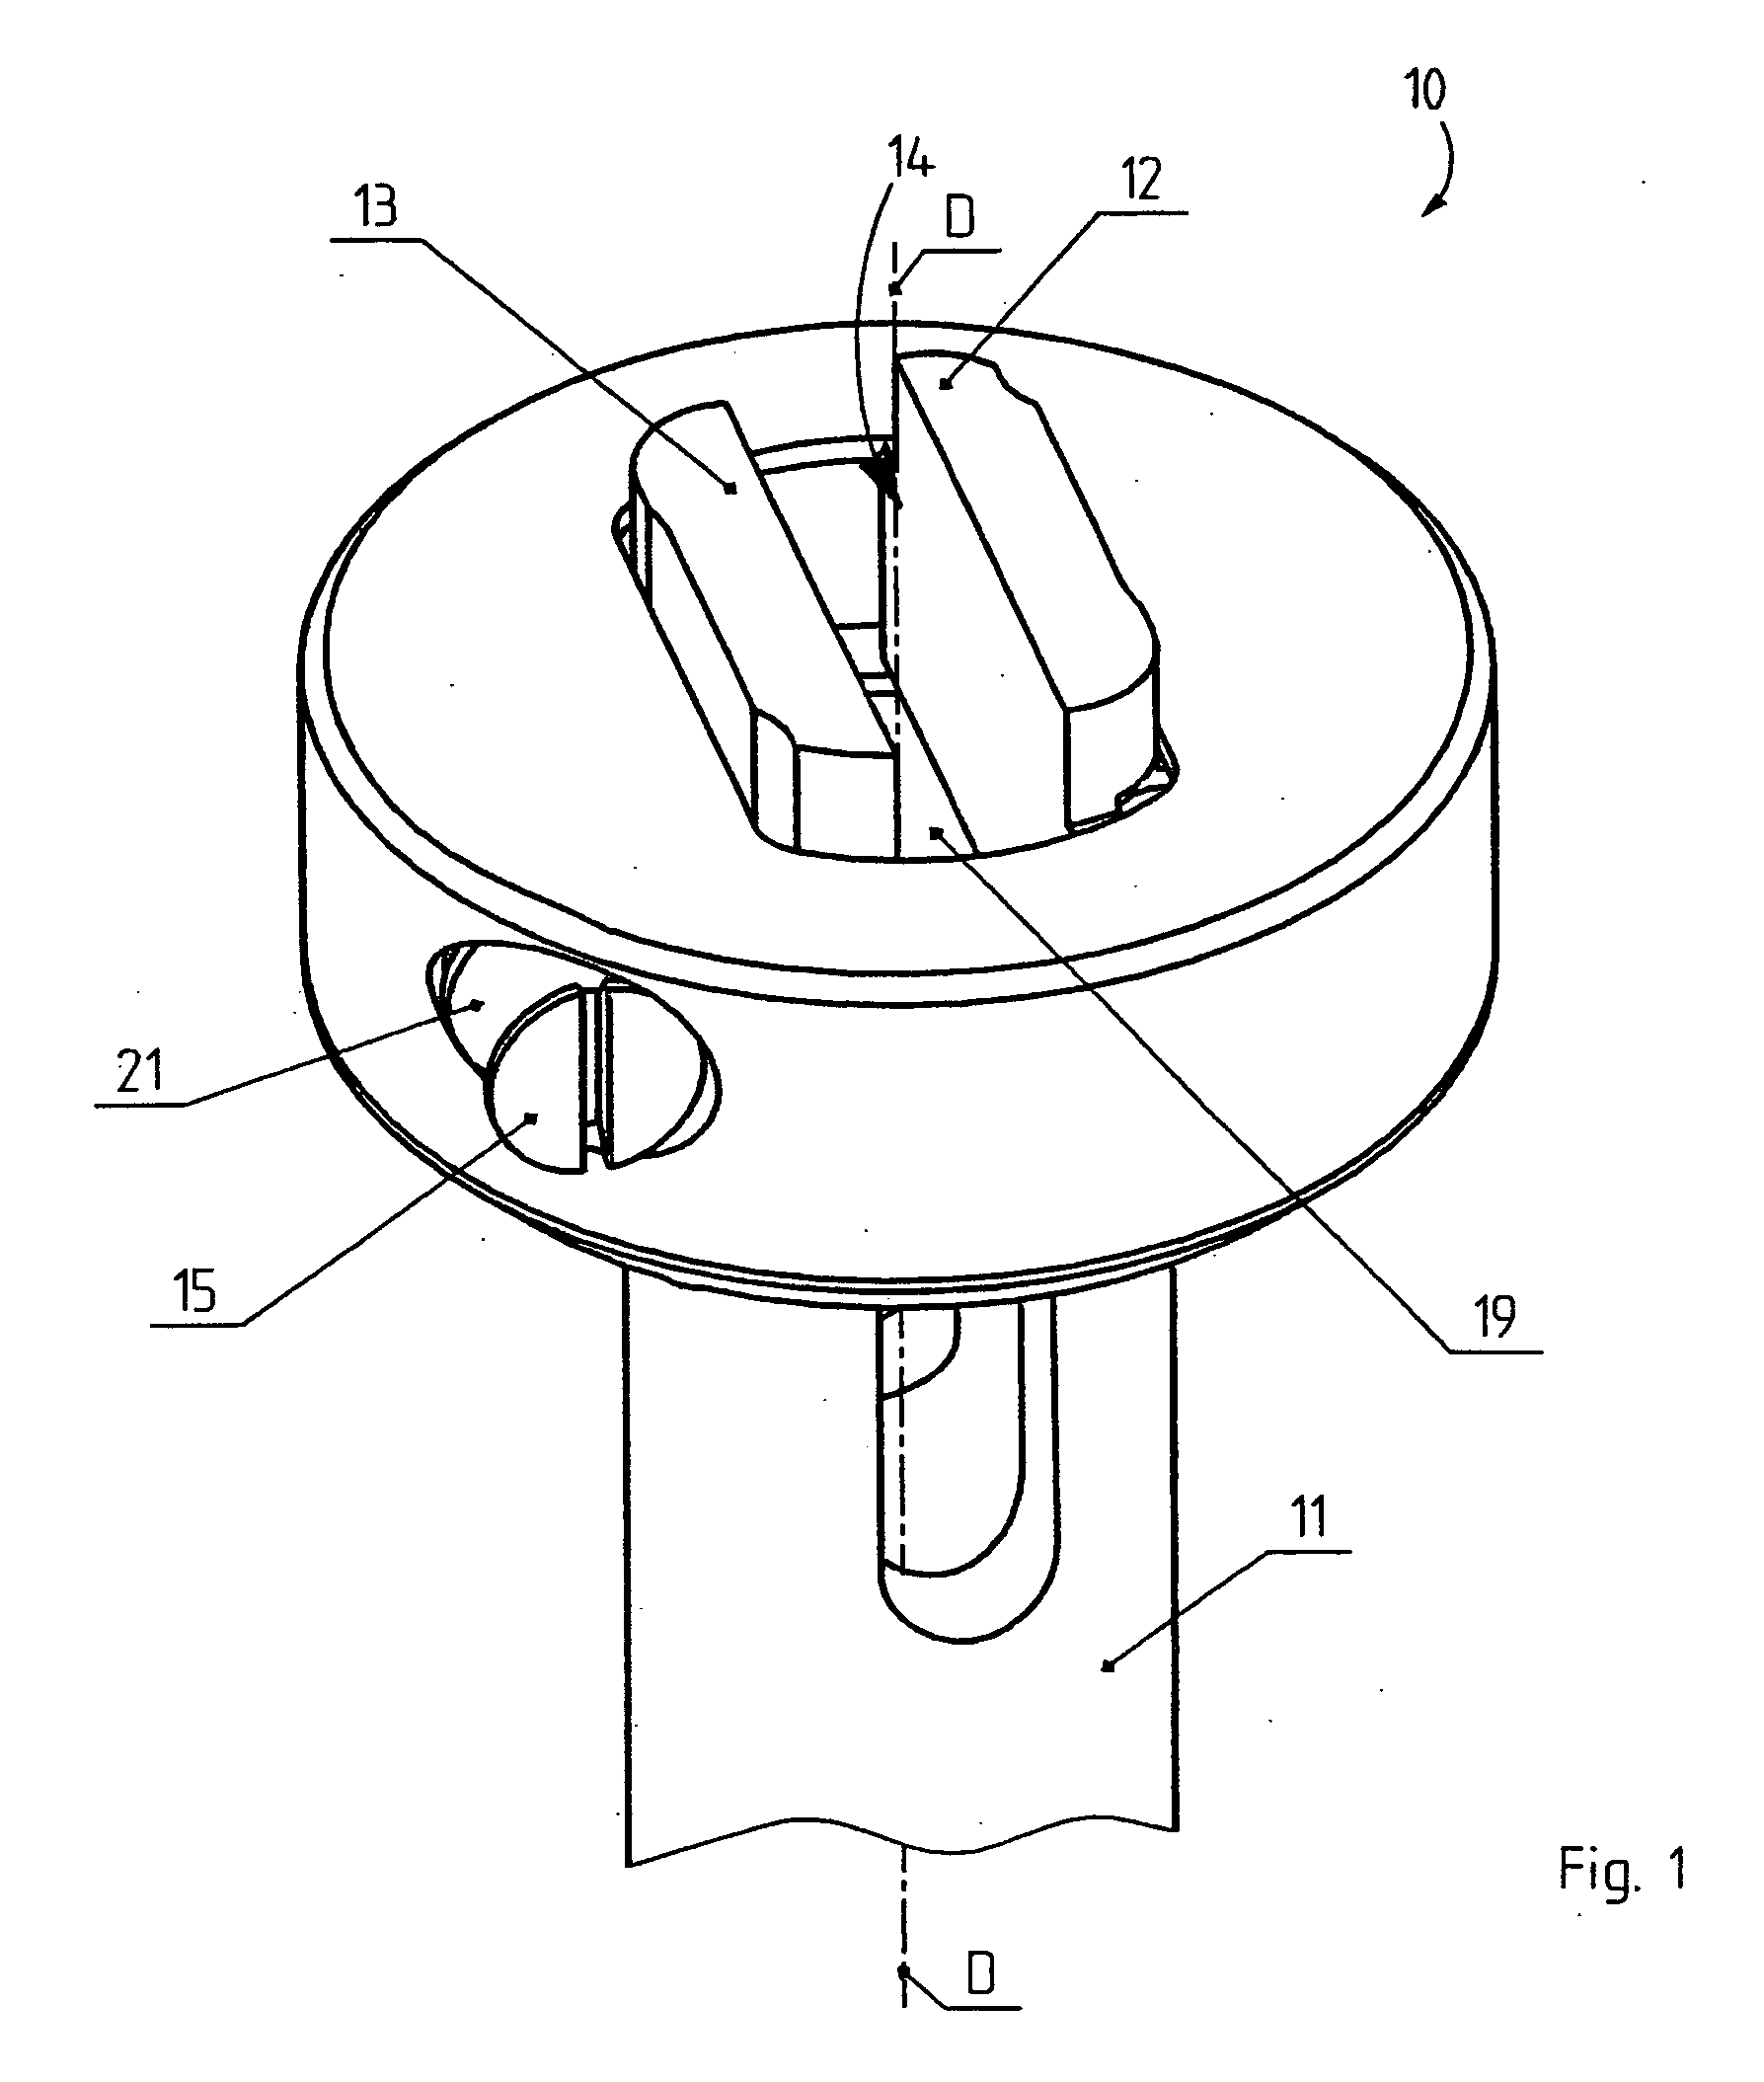 Test body clamping device in a rheometer